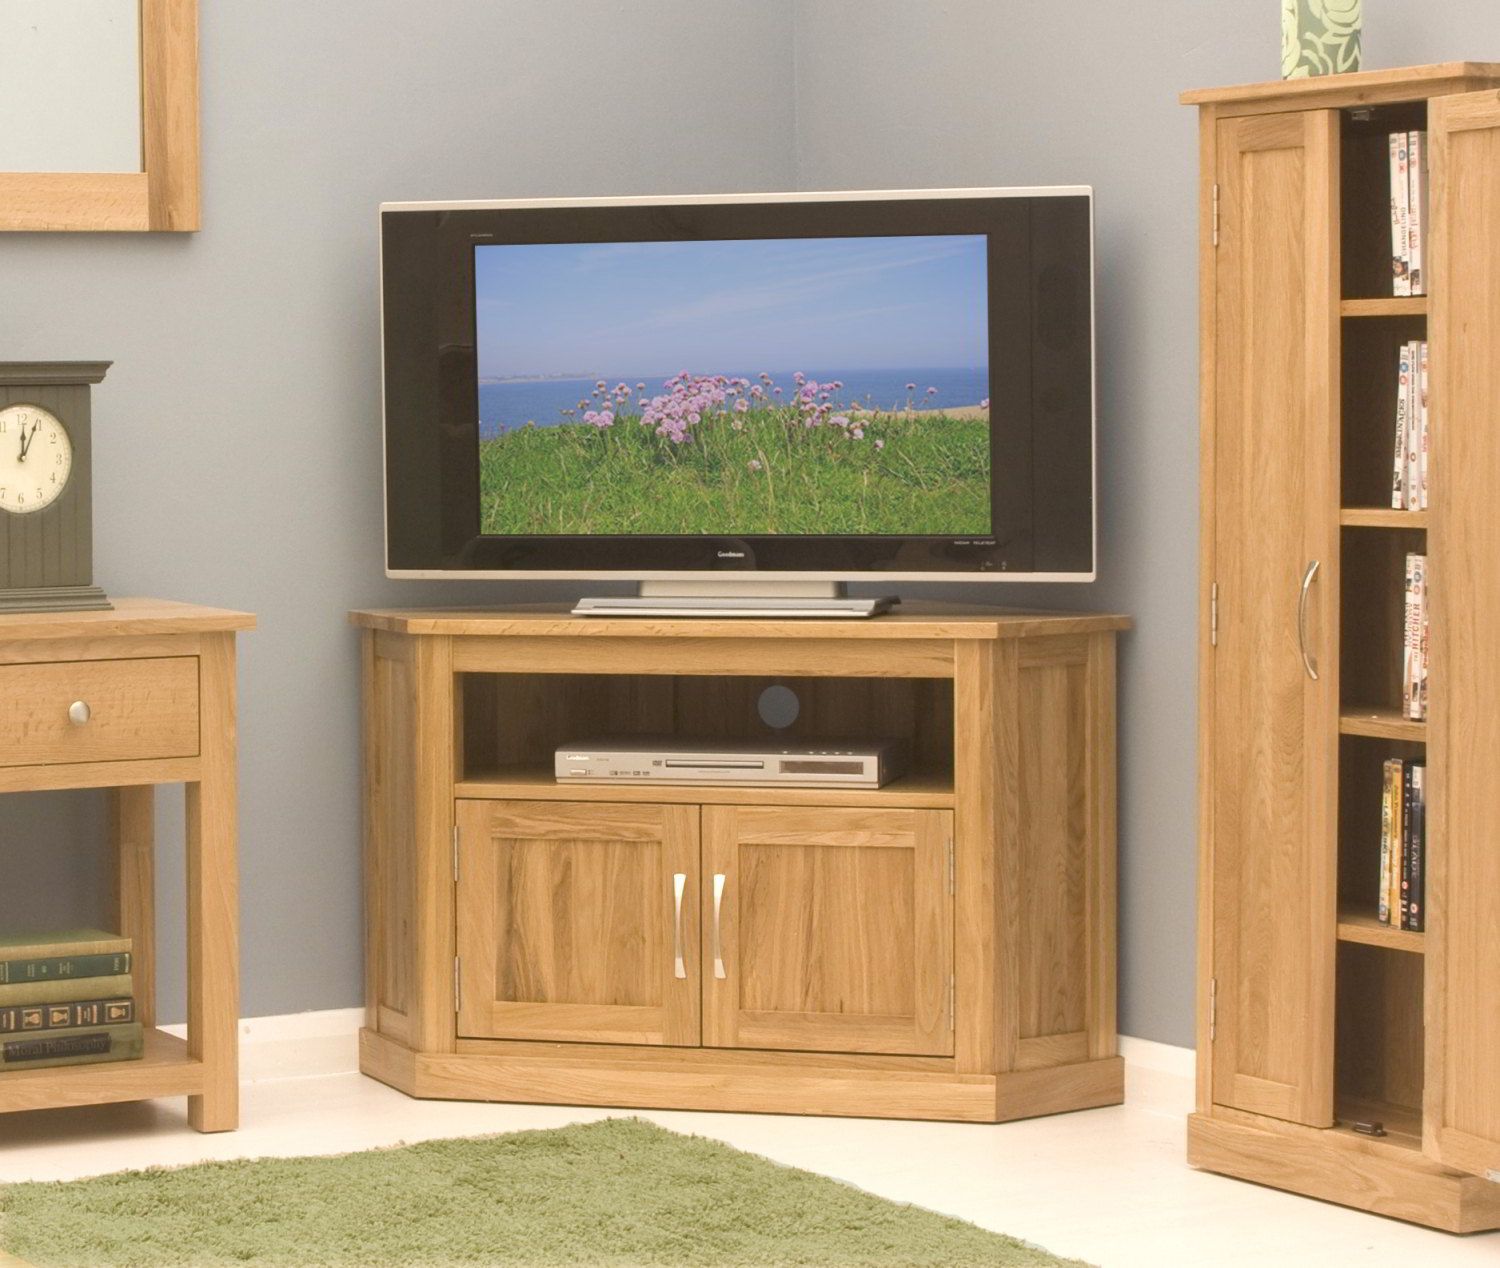 Conran Solid Oak Living Room Furniture Corner Television Throughout Living Room Tv Cabinets (View 10 of 15)